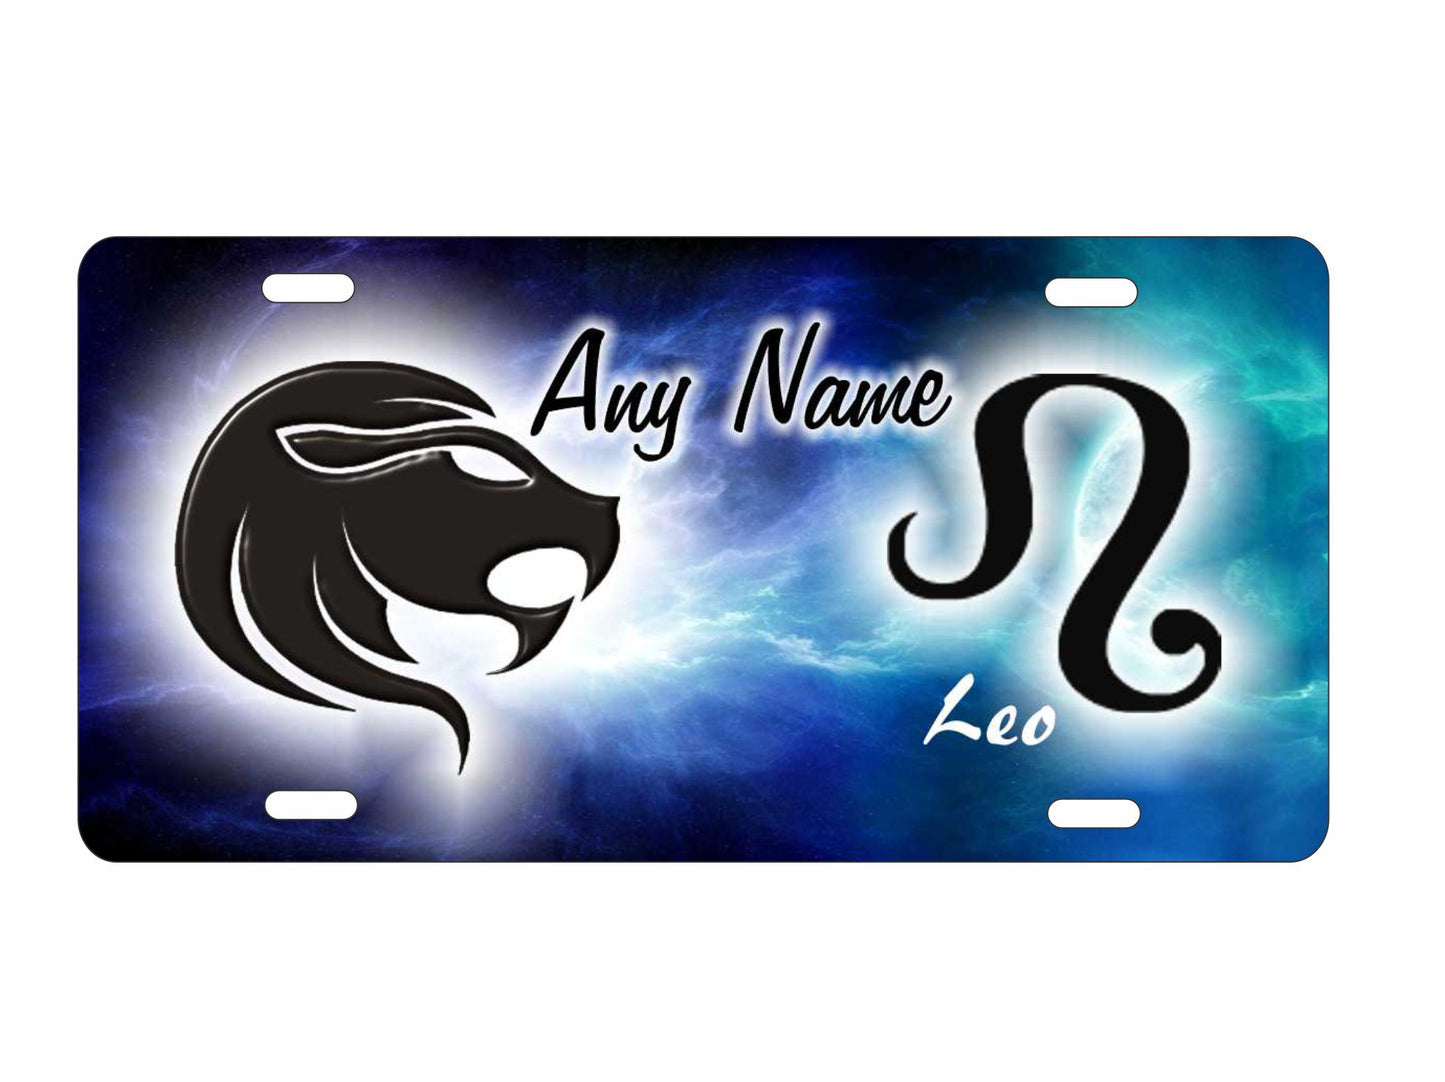 Leo zodiac symbol Astrological sign personalized novelty decorative front license plate